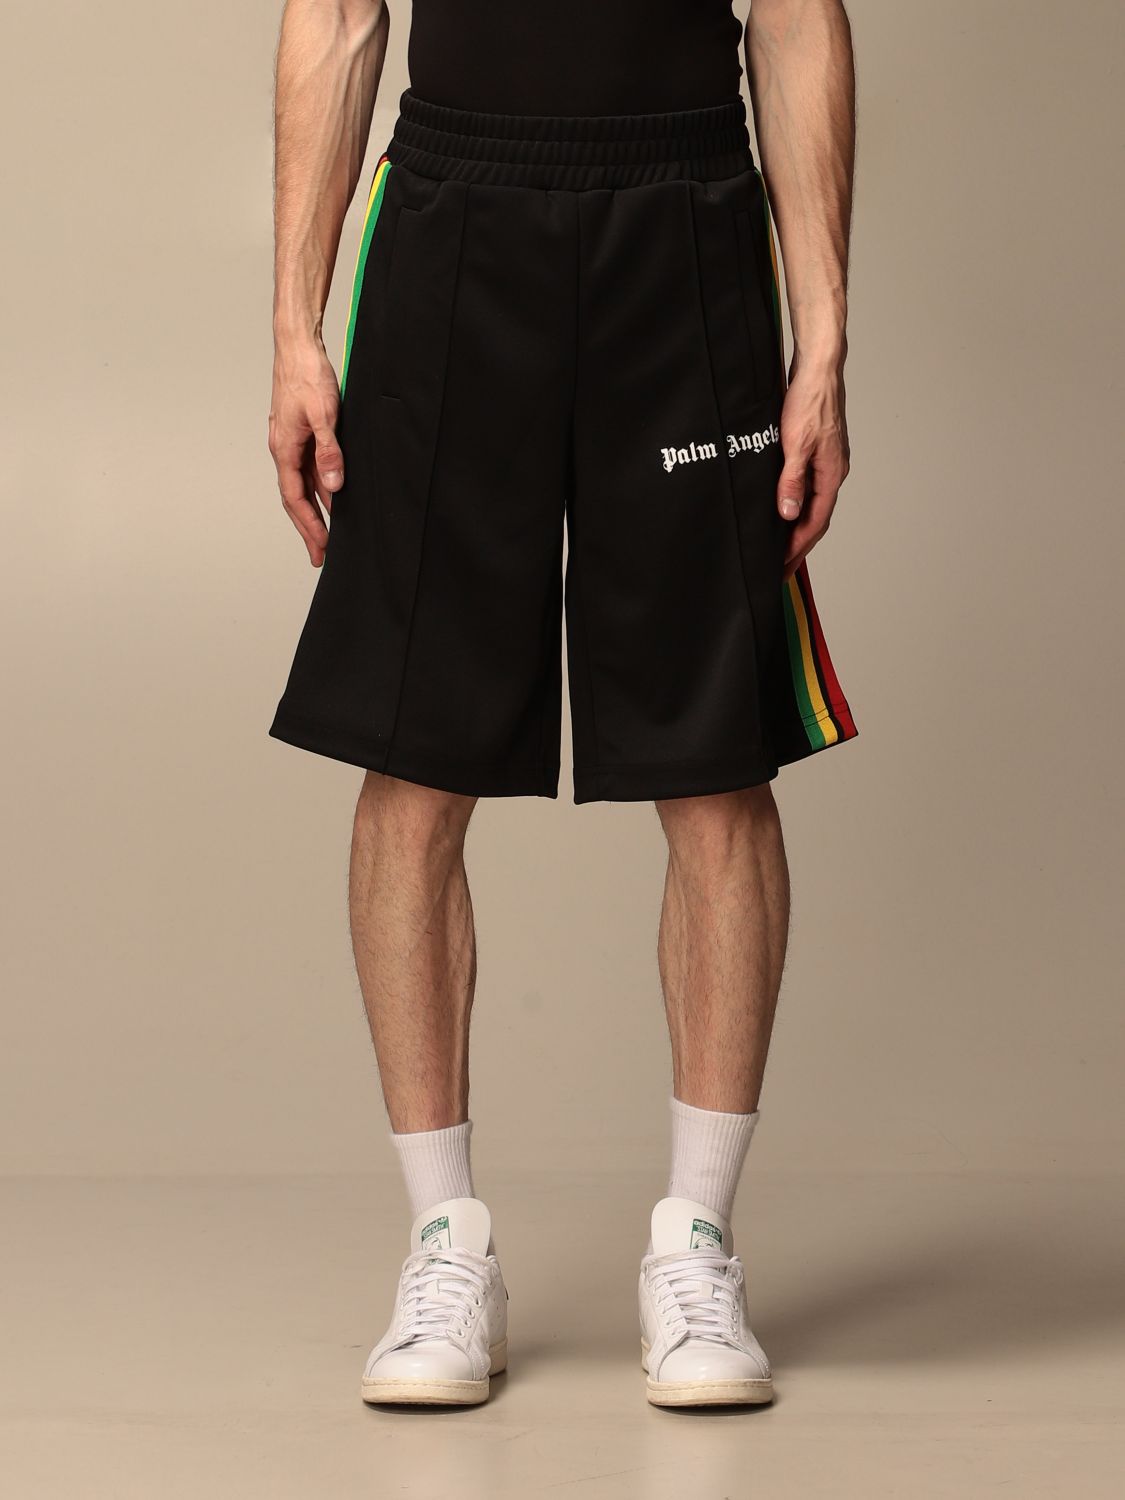 Palm Angels shorts with tricolor bands